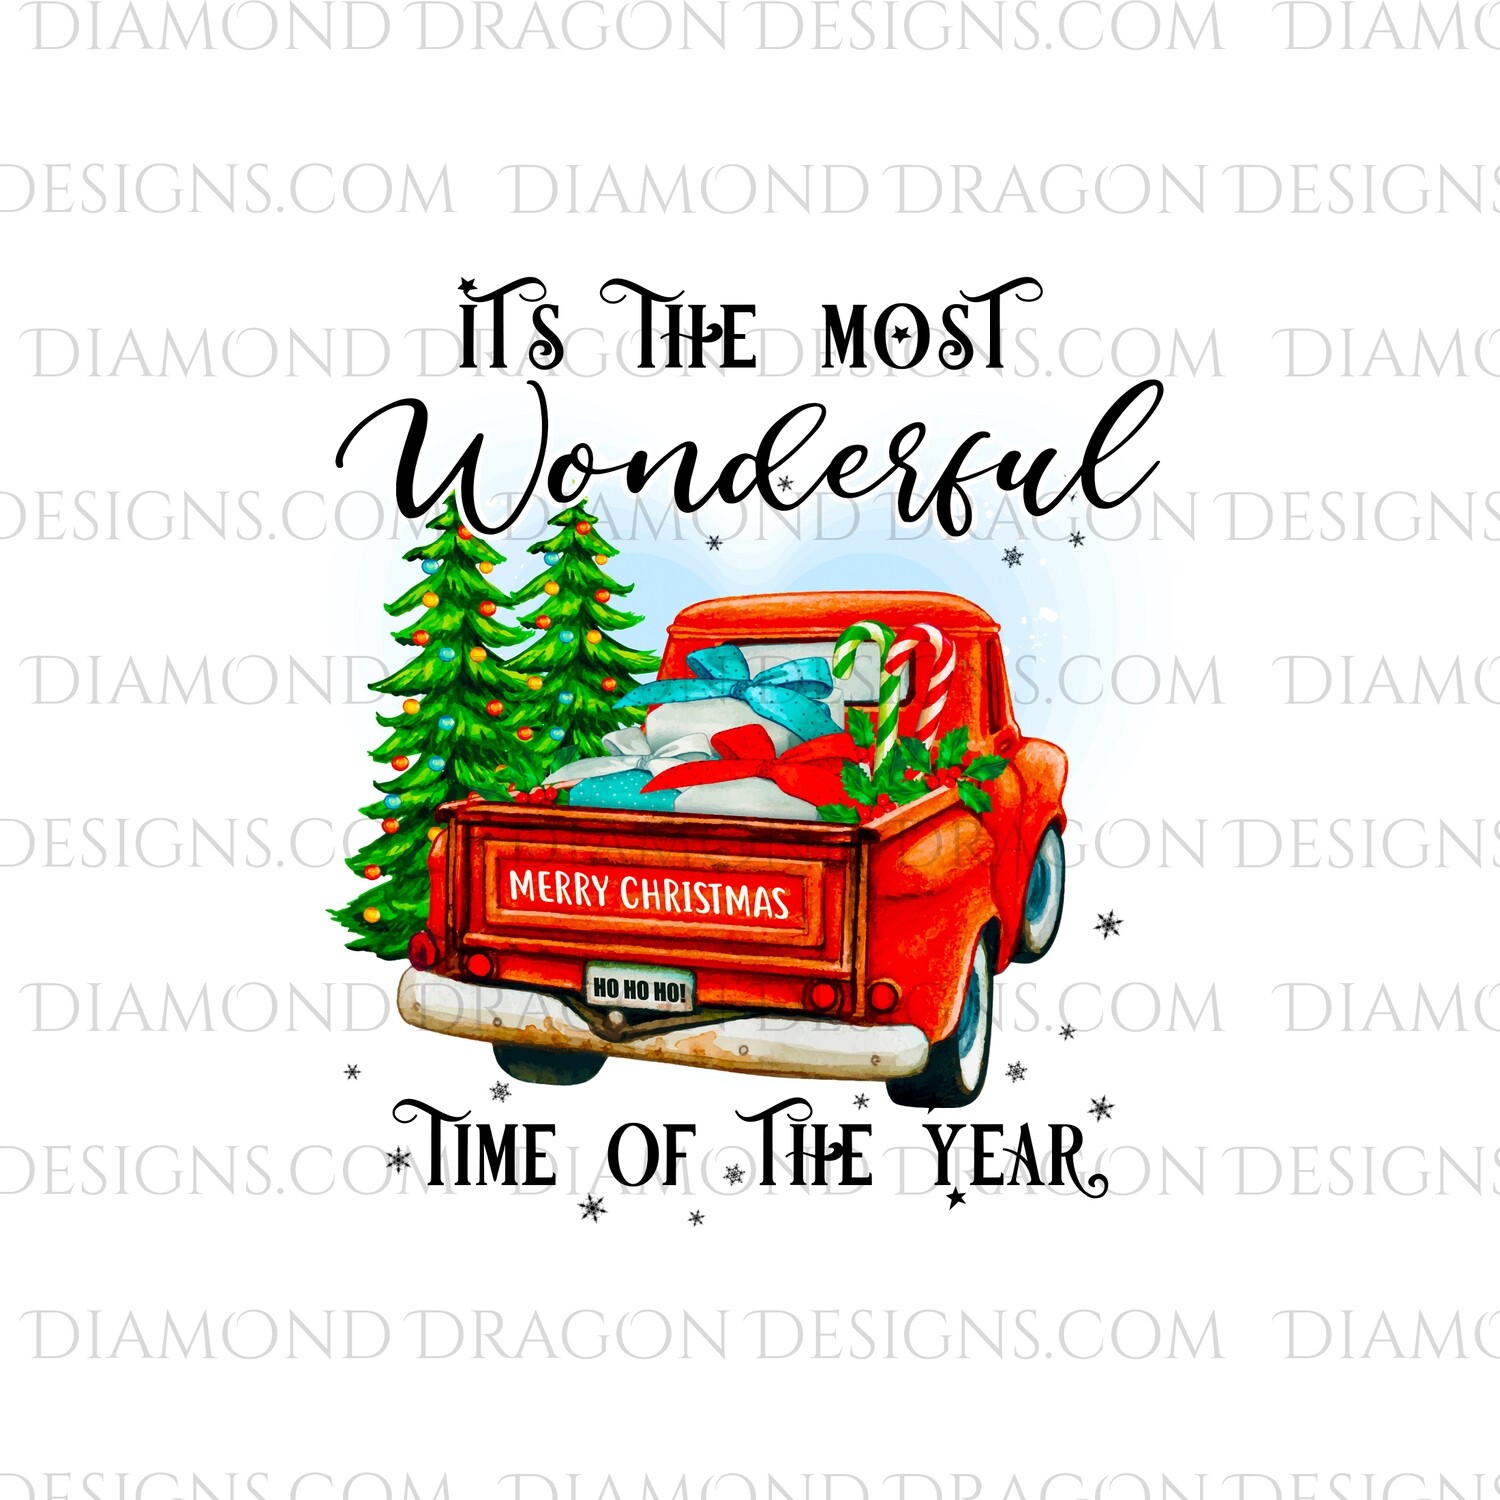 Christmas - Red Truck, Christmas Tree, It’s the most wonderful time, Red Vintage Truck, Digital Image